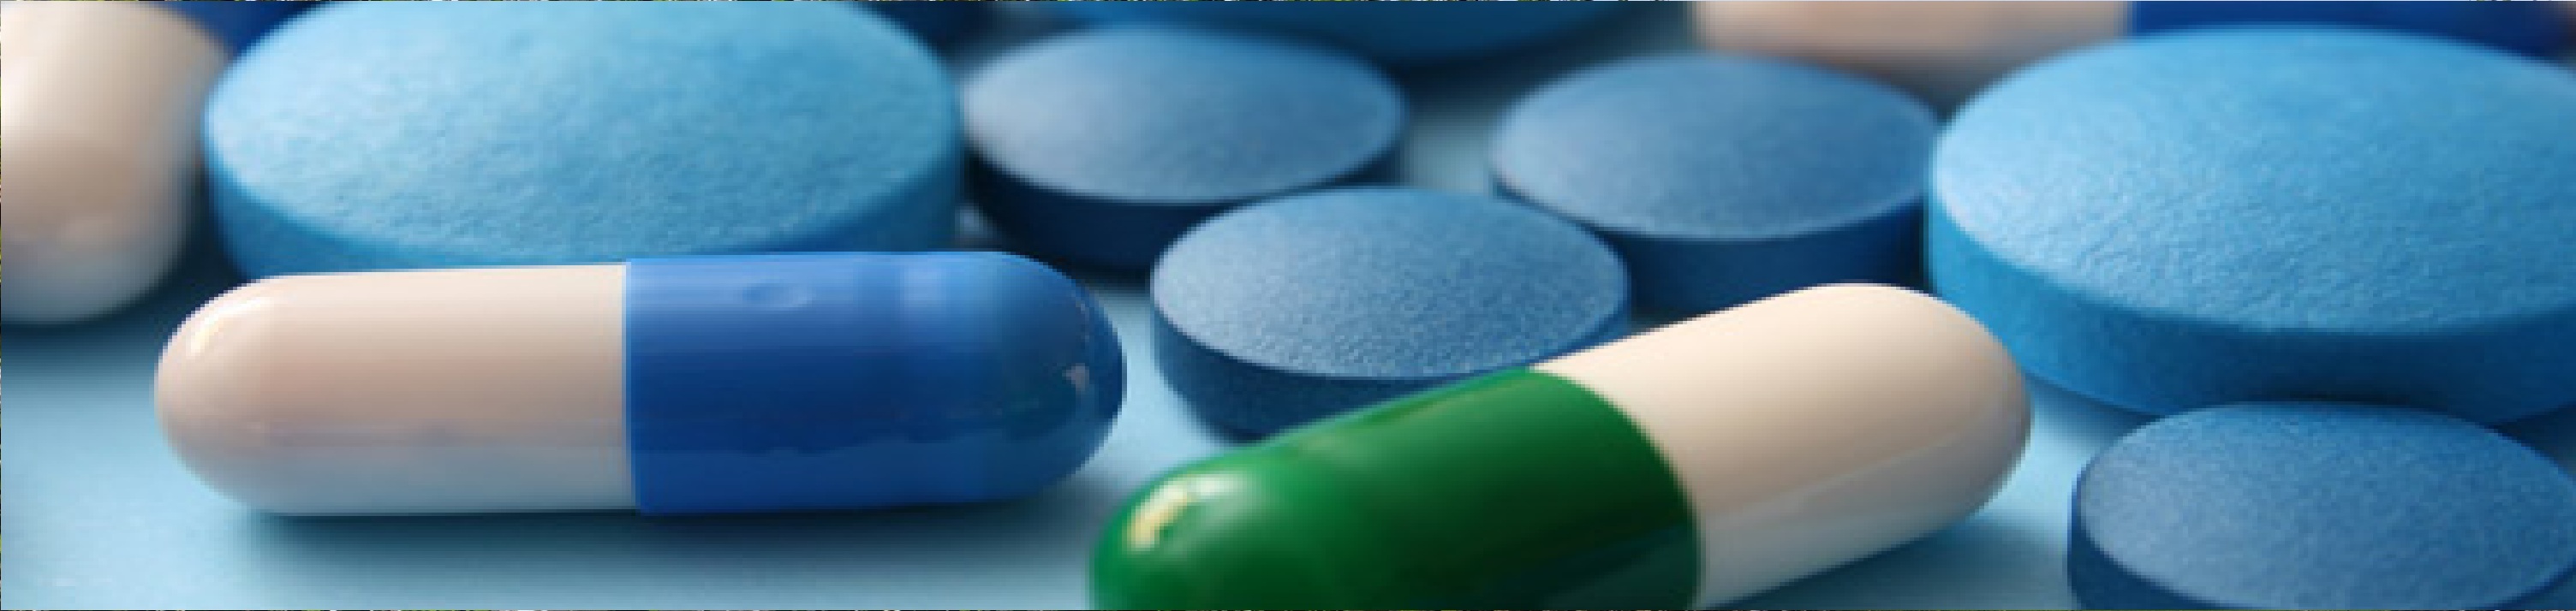 A variety of pharmaceuticals spread out on a piece of blue paper